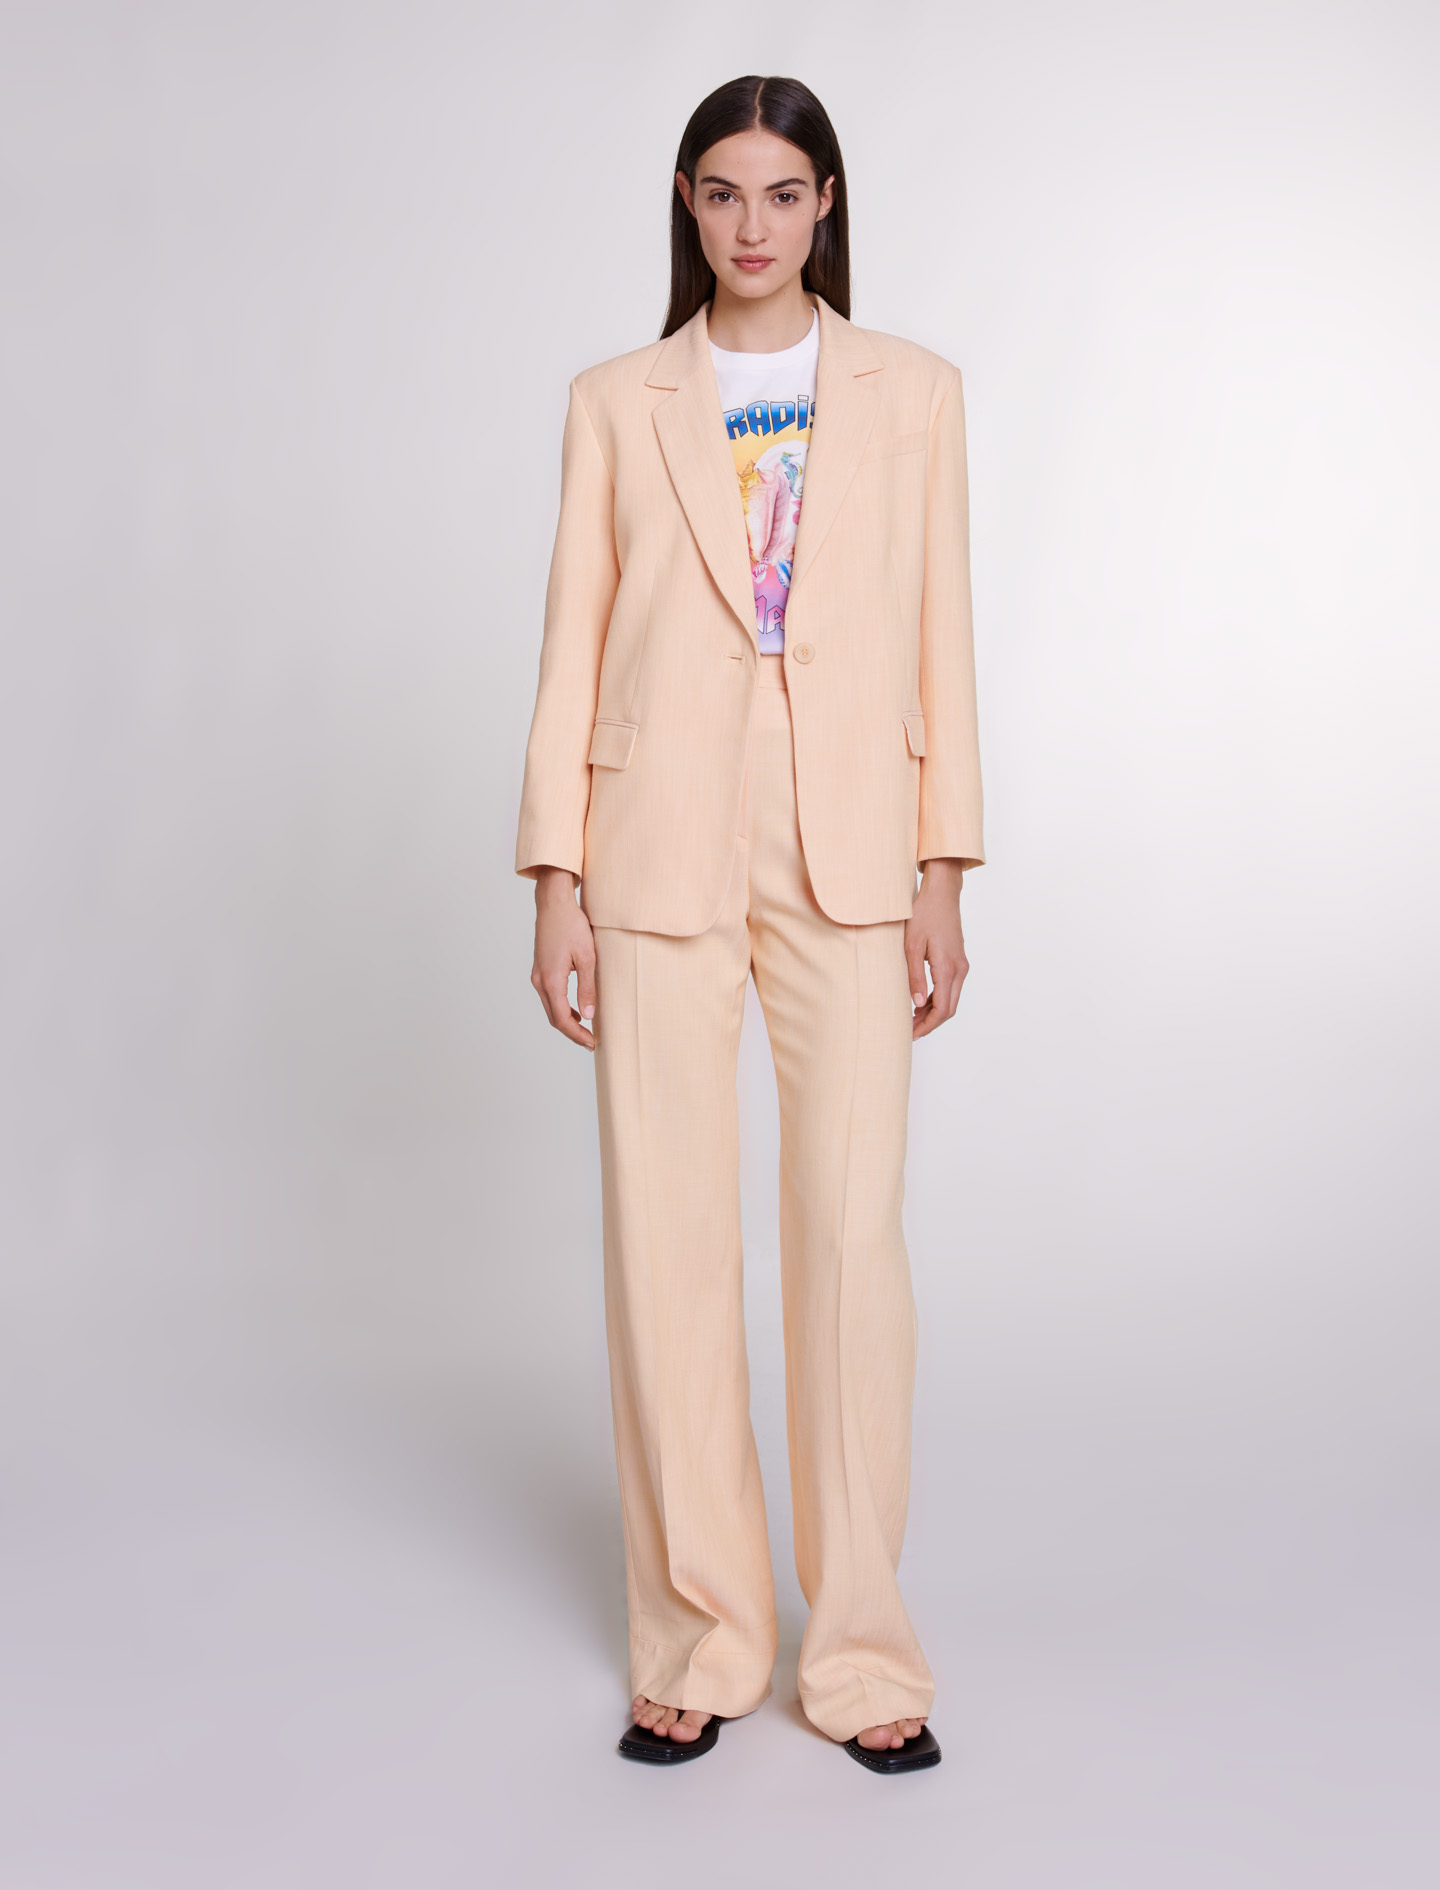 Maje Woman's viscose, Suit jacket for Spring/Summer, in color Yellow banana /